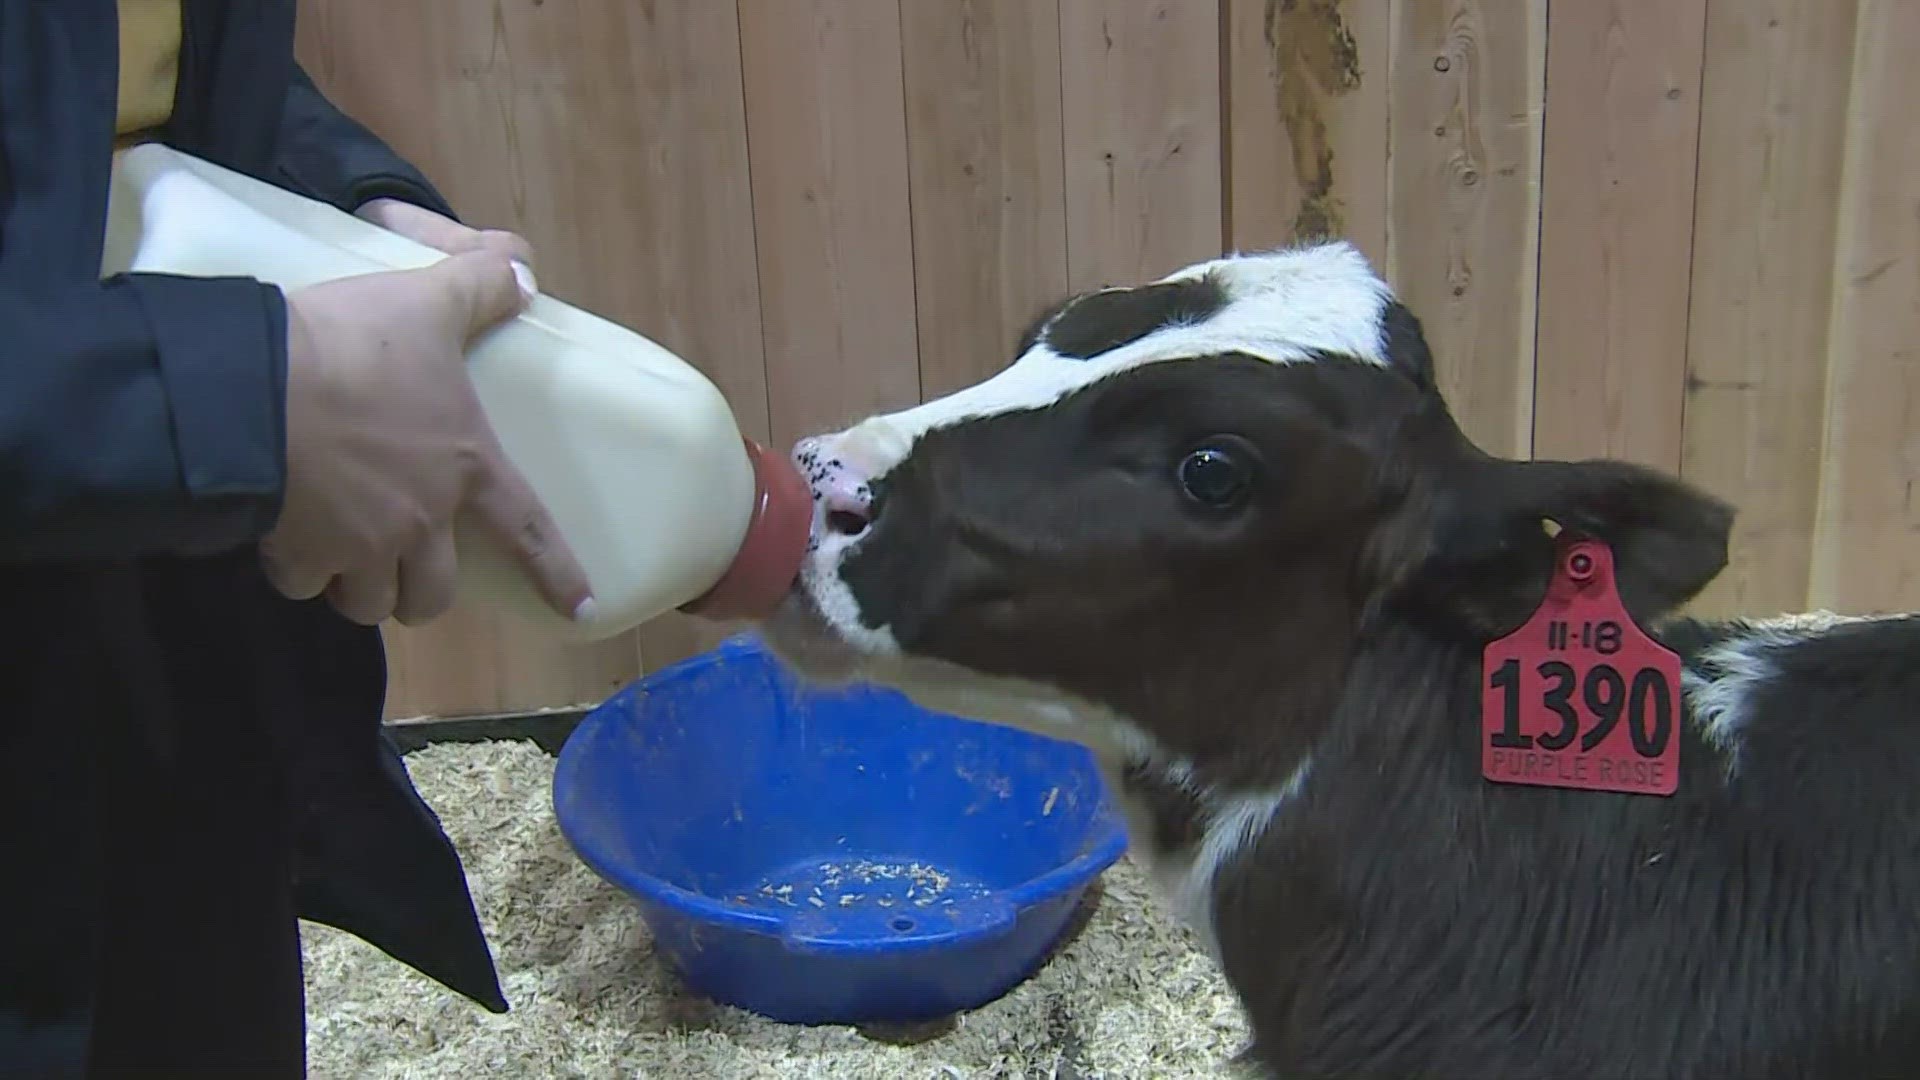 The National Western Nursery is home to the show's most recent arrivals: cute baby animals.